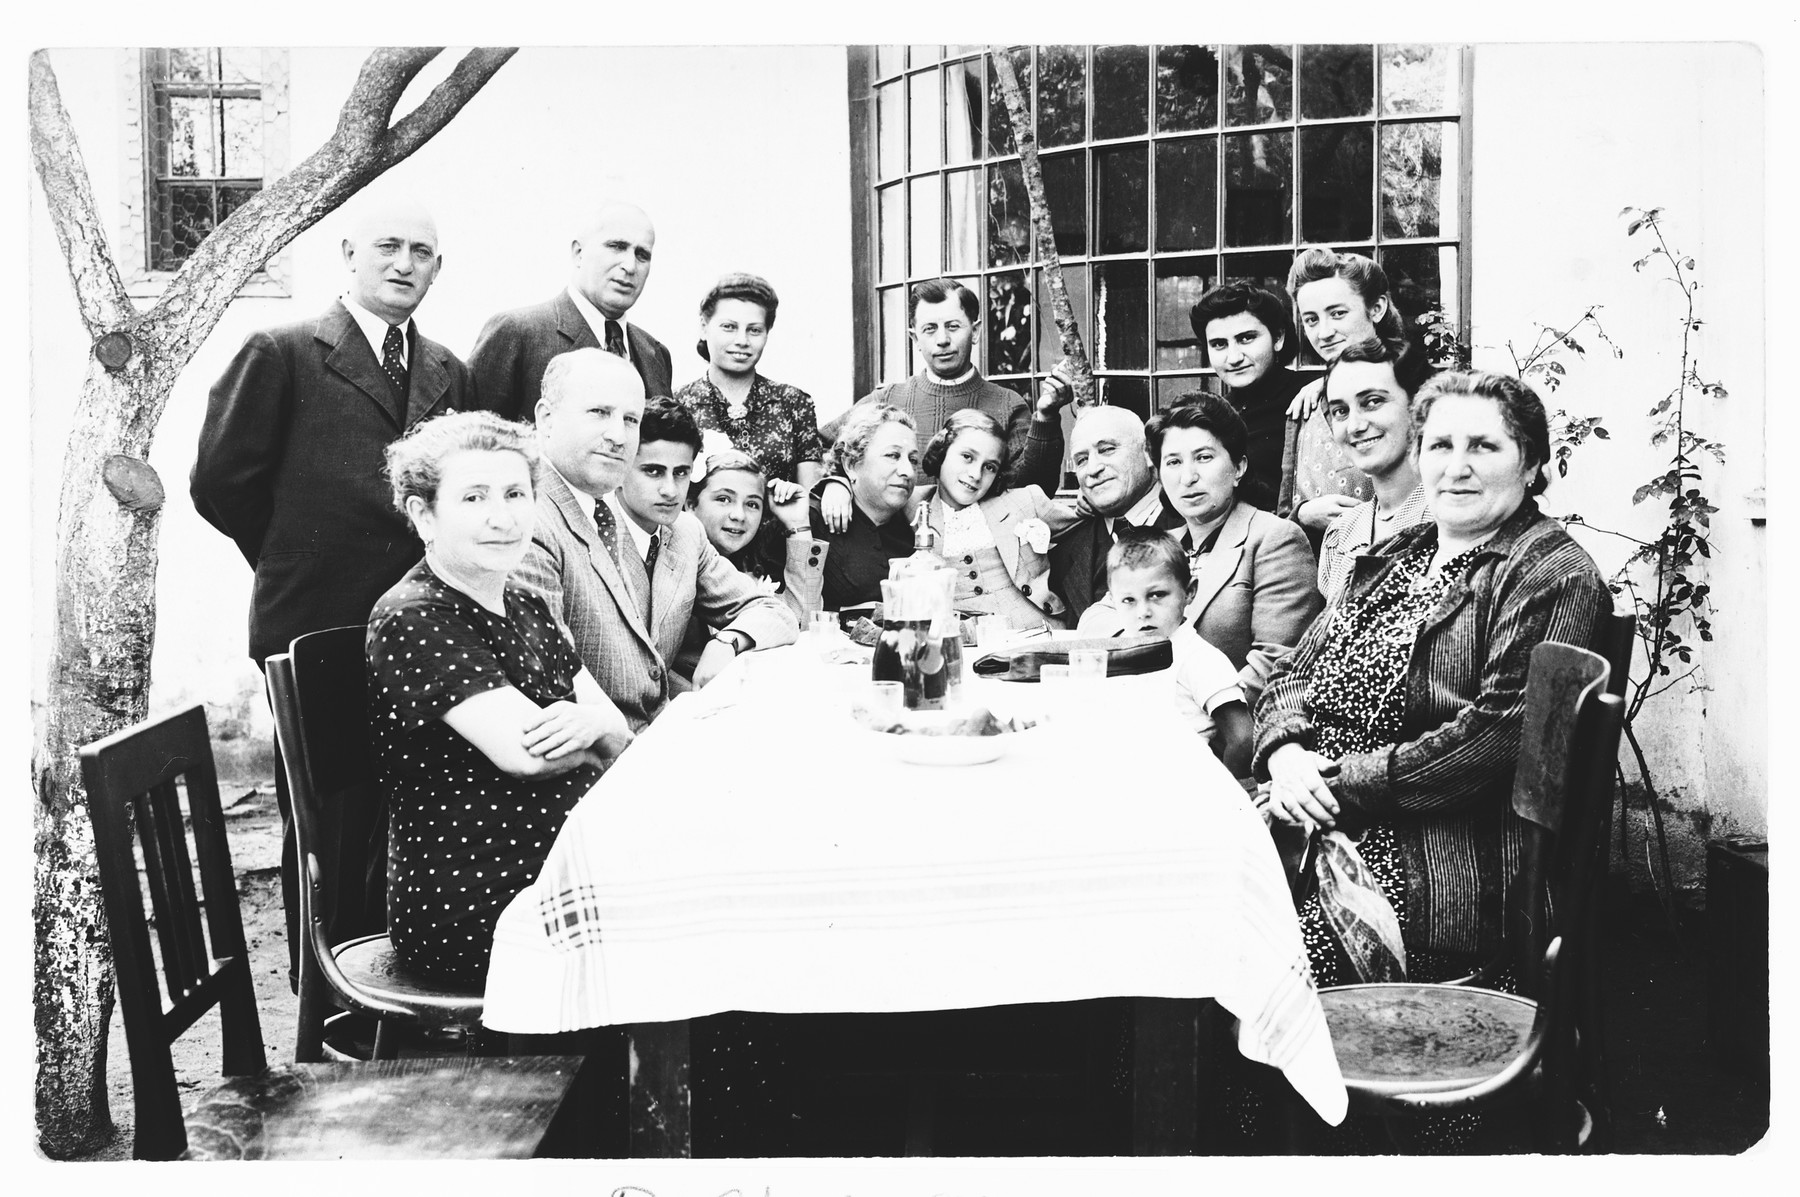 The extended Krasso and Spitzer families pose outside around a table at a family gathering shortly before the start of the war.

Among those pictured are Miriam Spitzer (fourth from the left), her mother Ilonka Spitzer (second from the right) and sister Leah (center next to her grandparents).